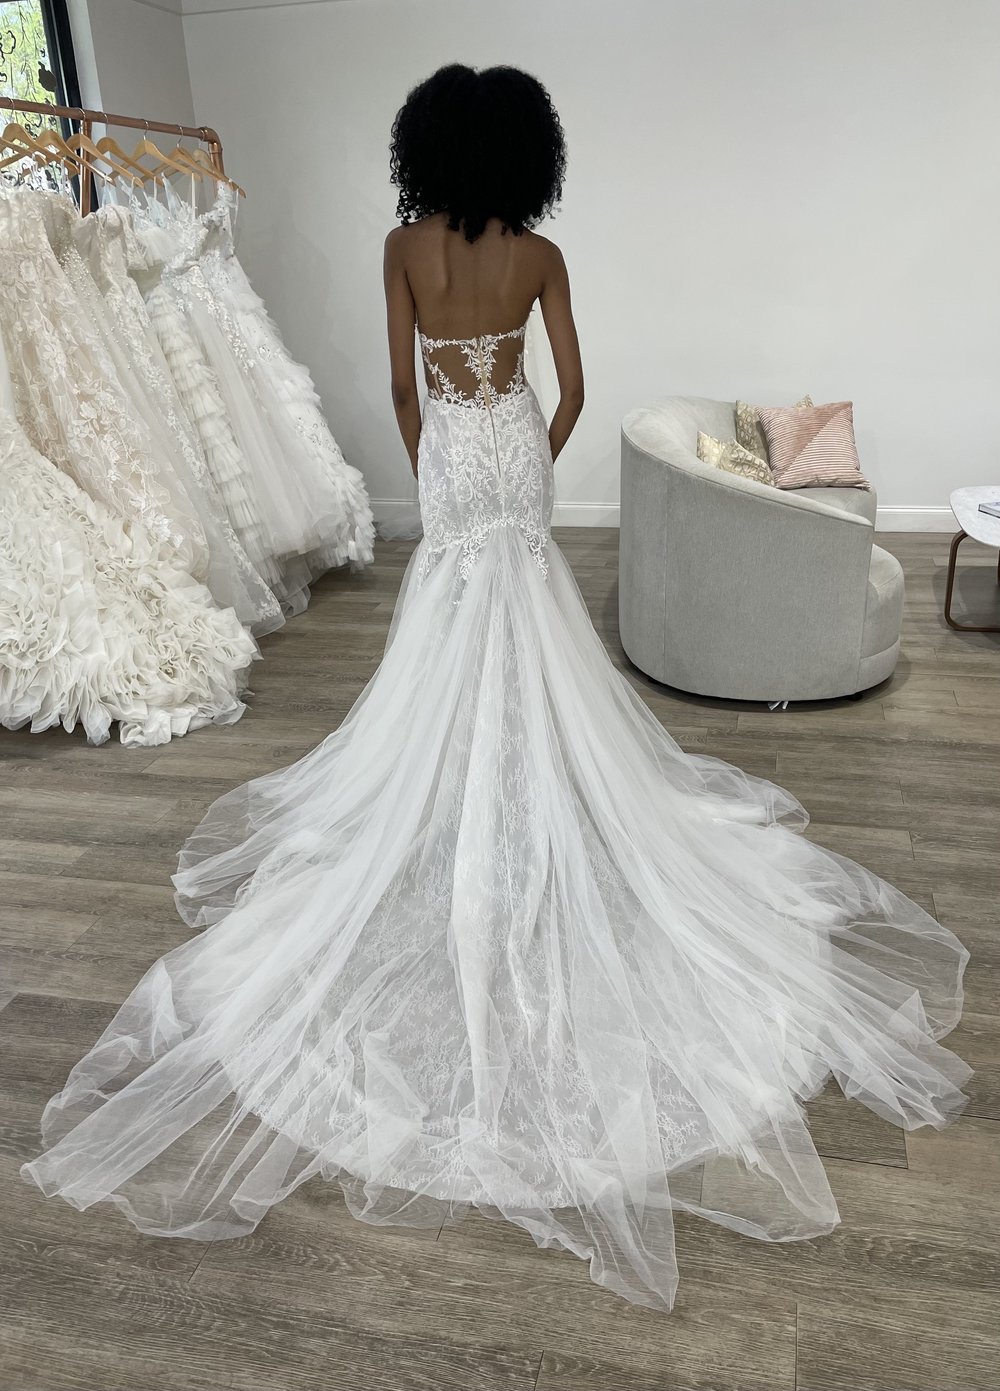 Joy Ines Di Santo Wedding Dress Available for Off The Rack